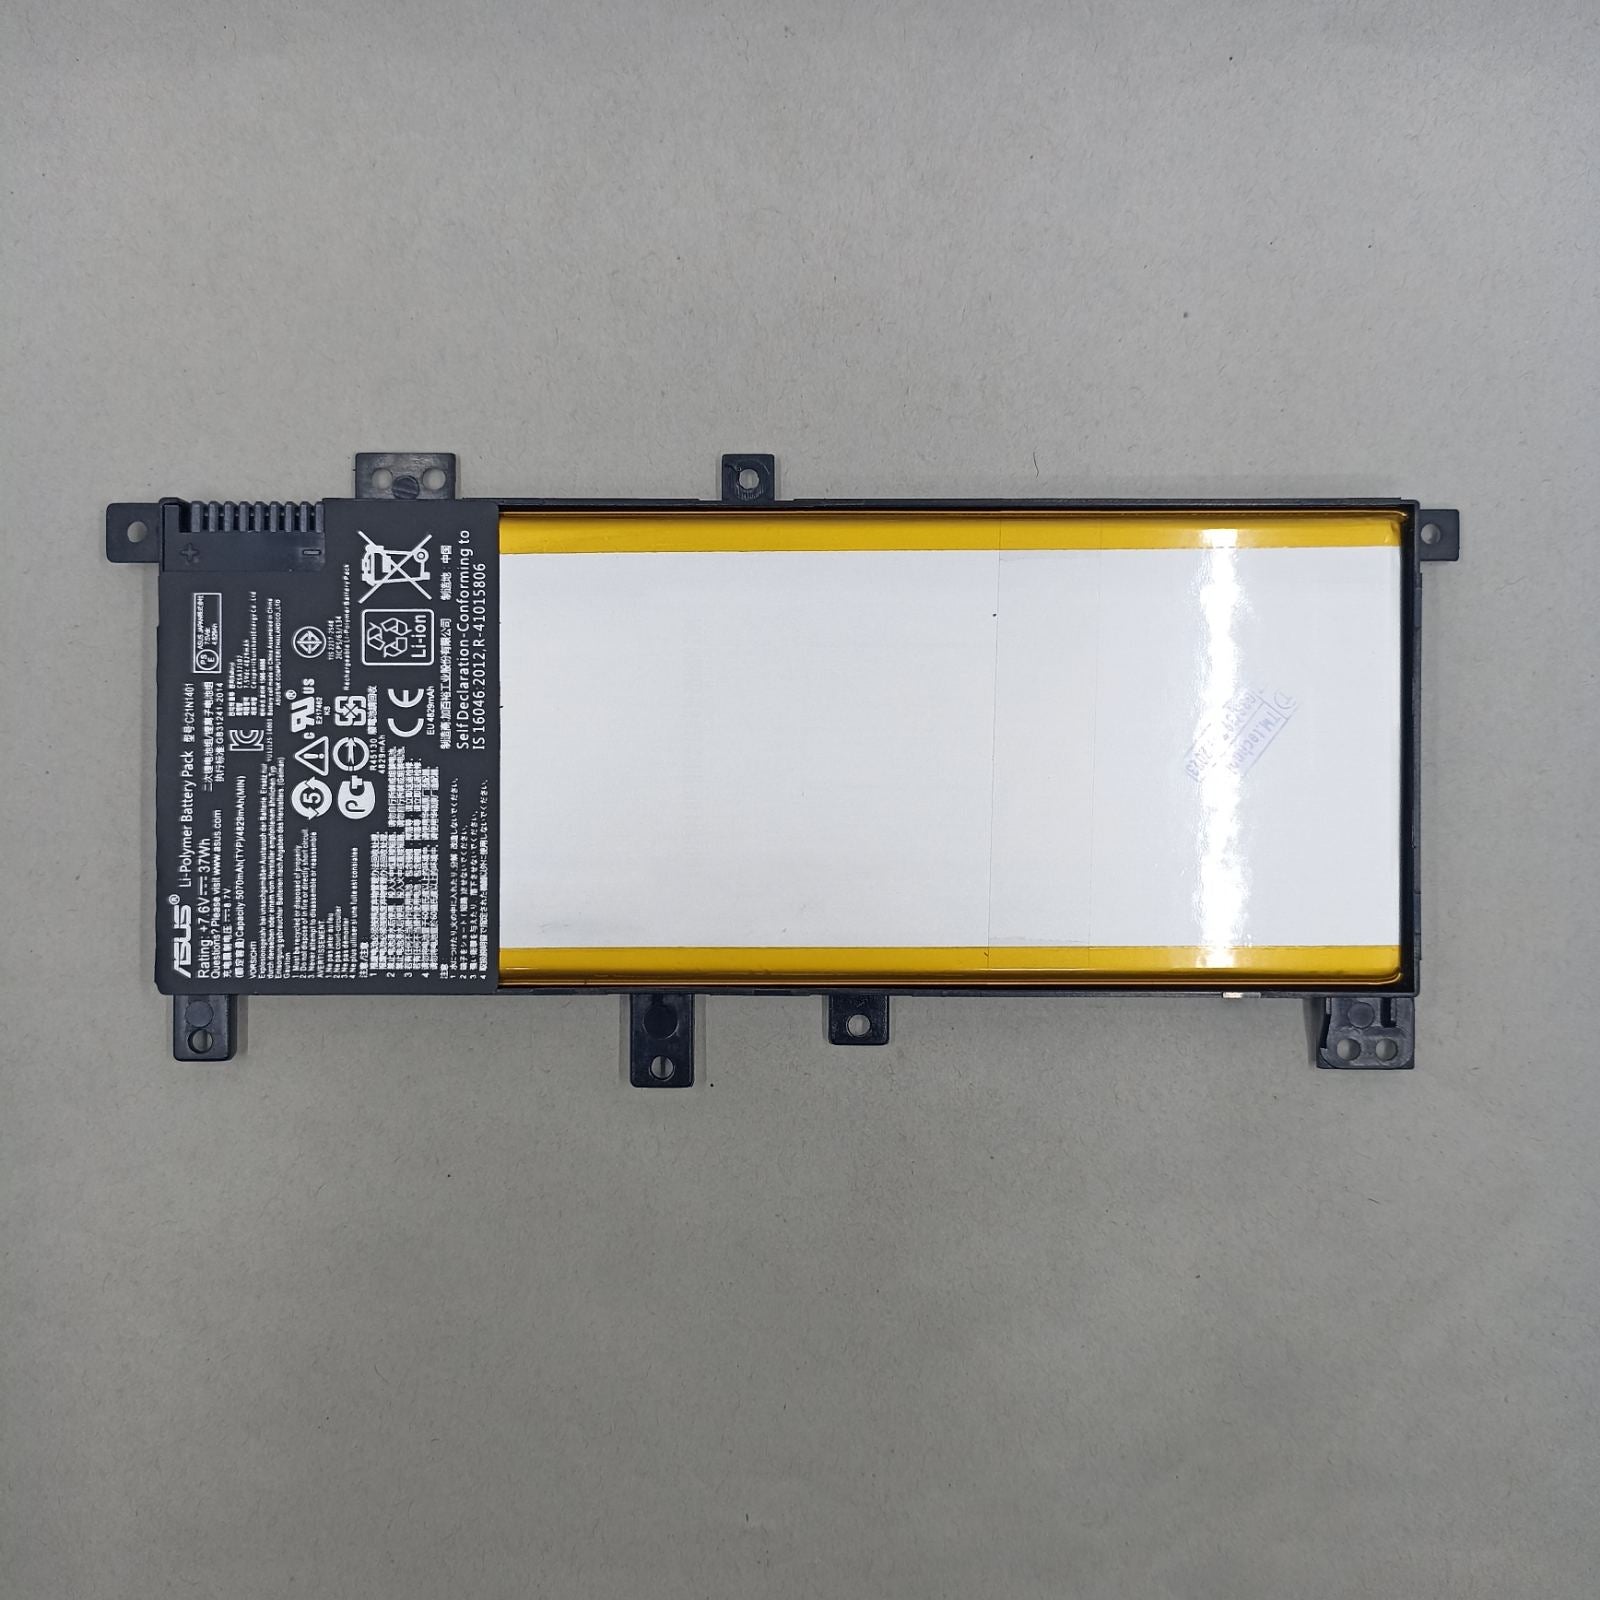 Replacement Battery for Asus X455L A1